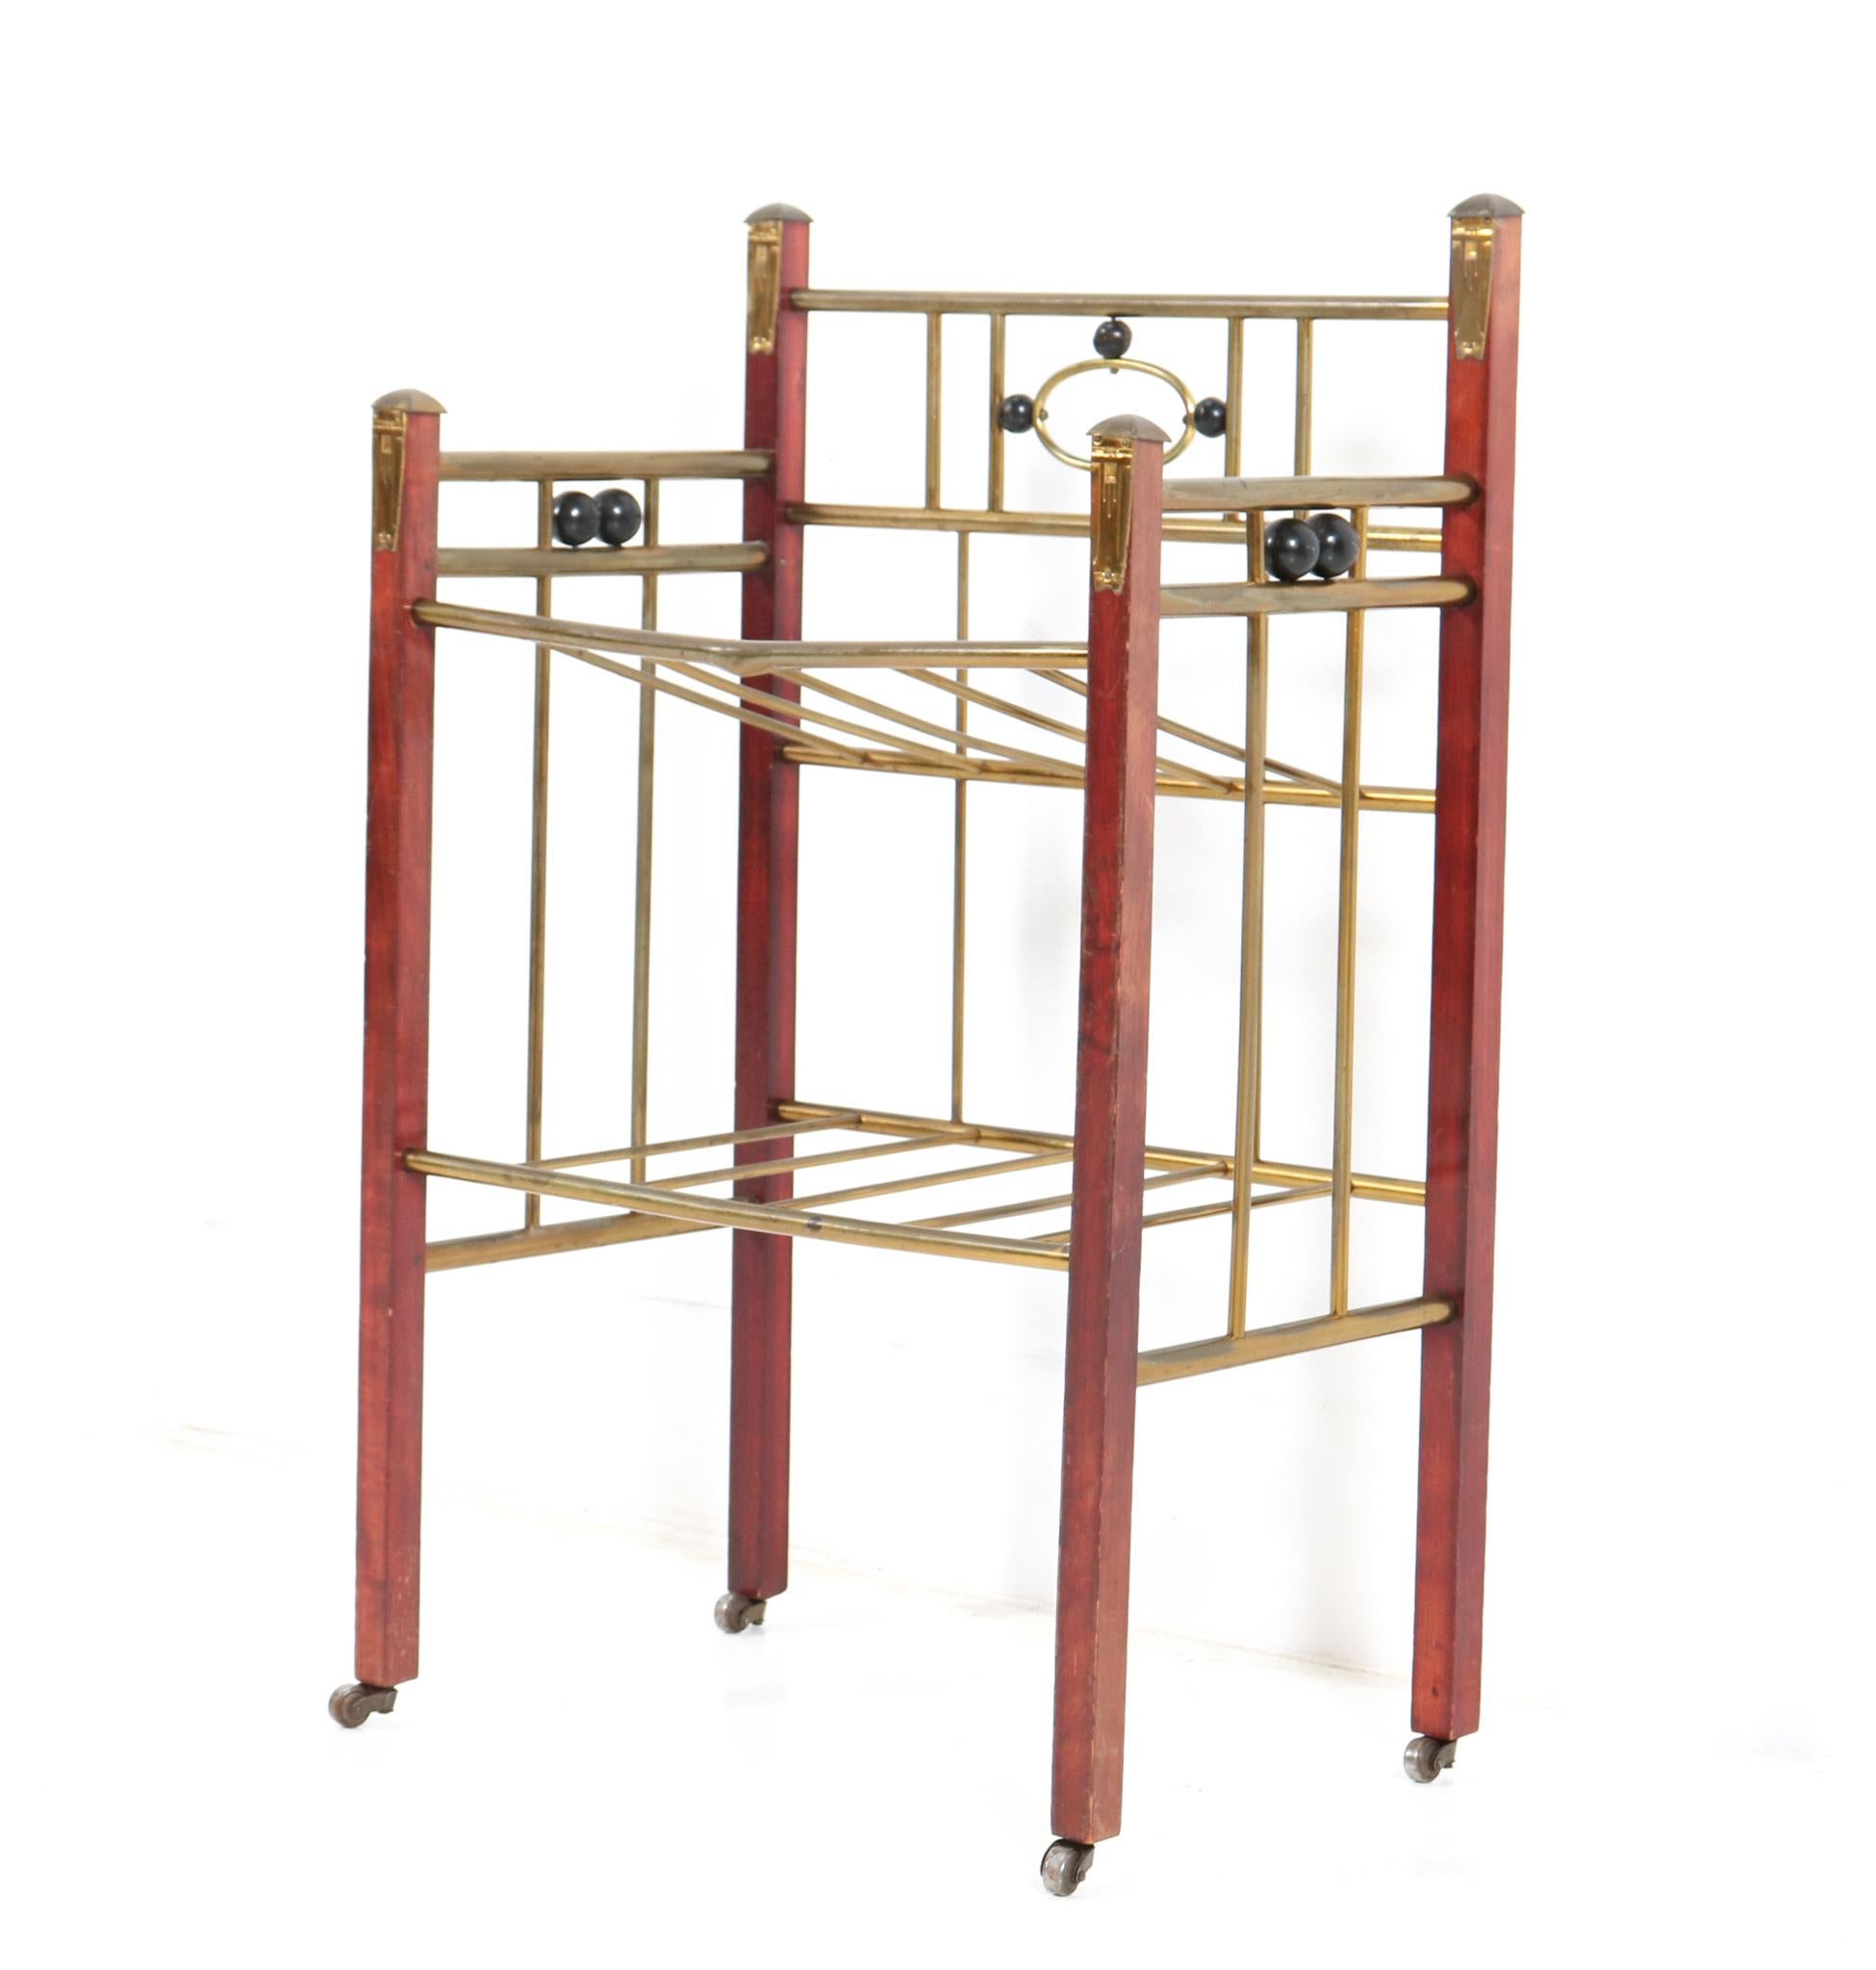 Early 20th Century Lacquered Beech Vienna Secession Magazine Rack or Stand, 1900s For Sale